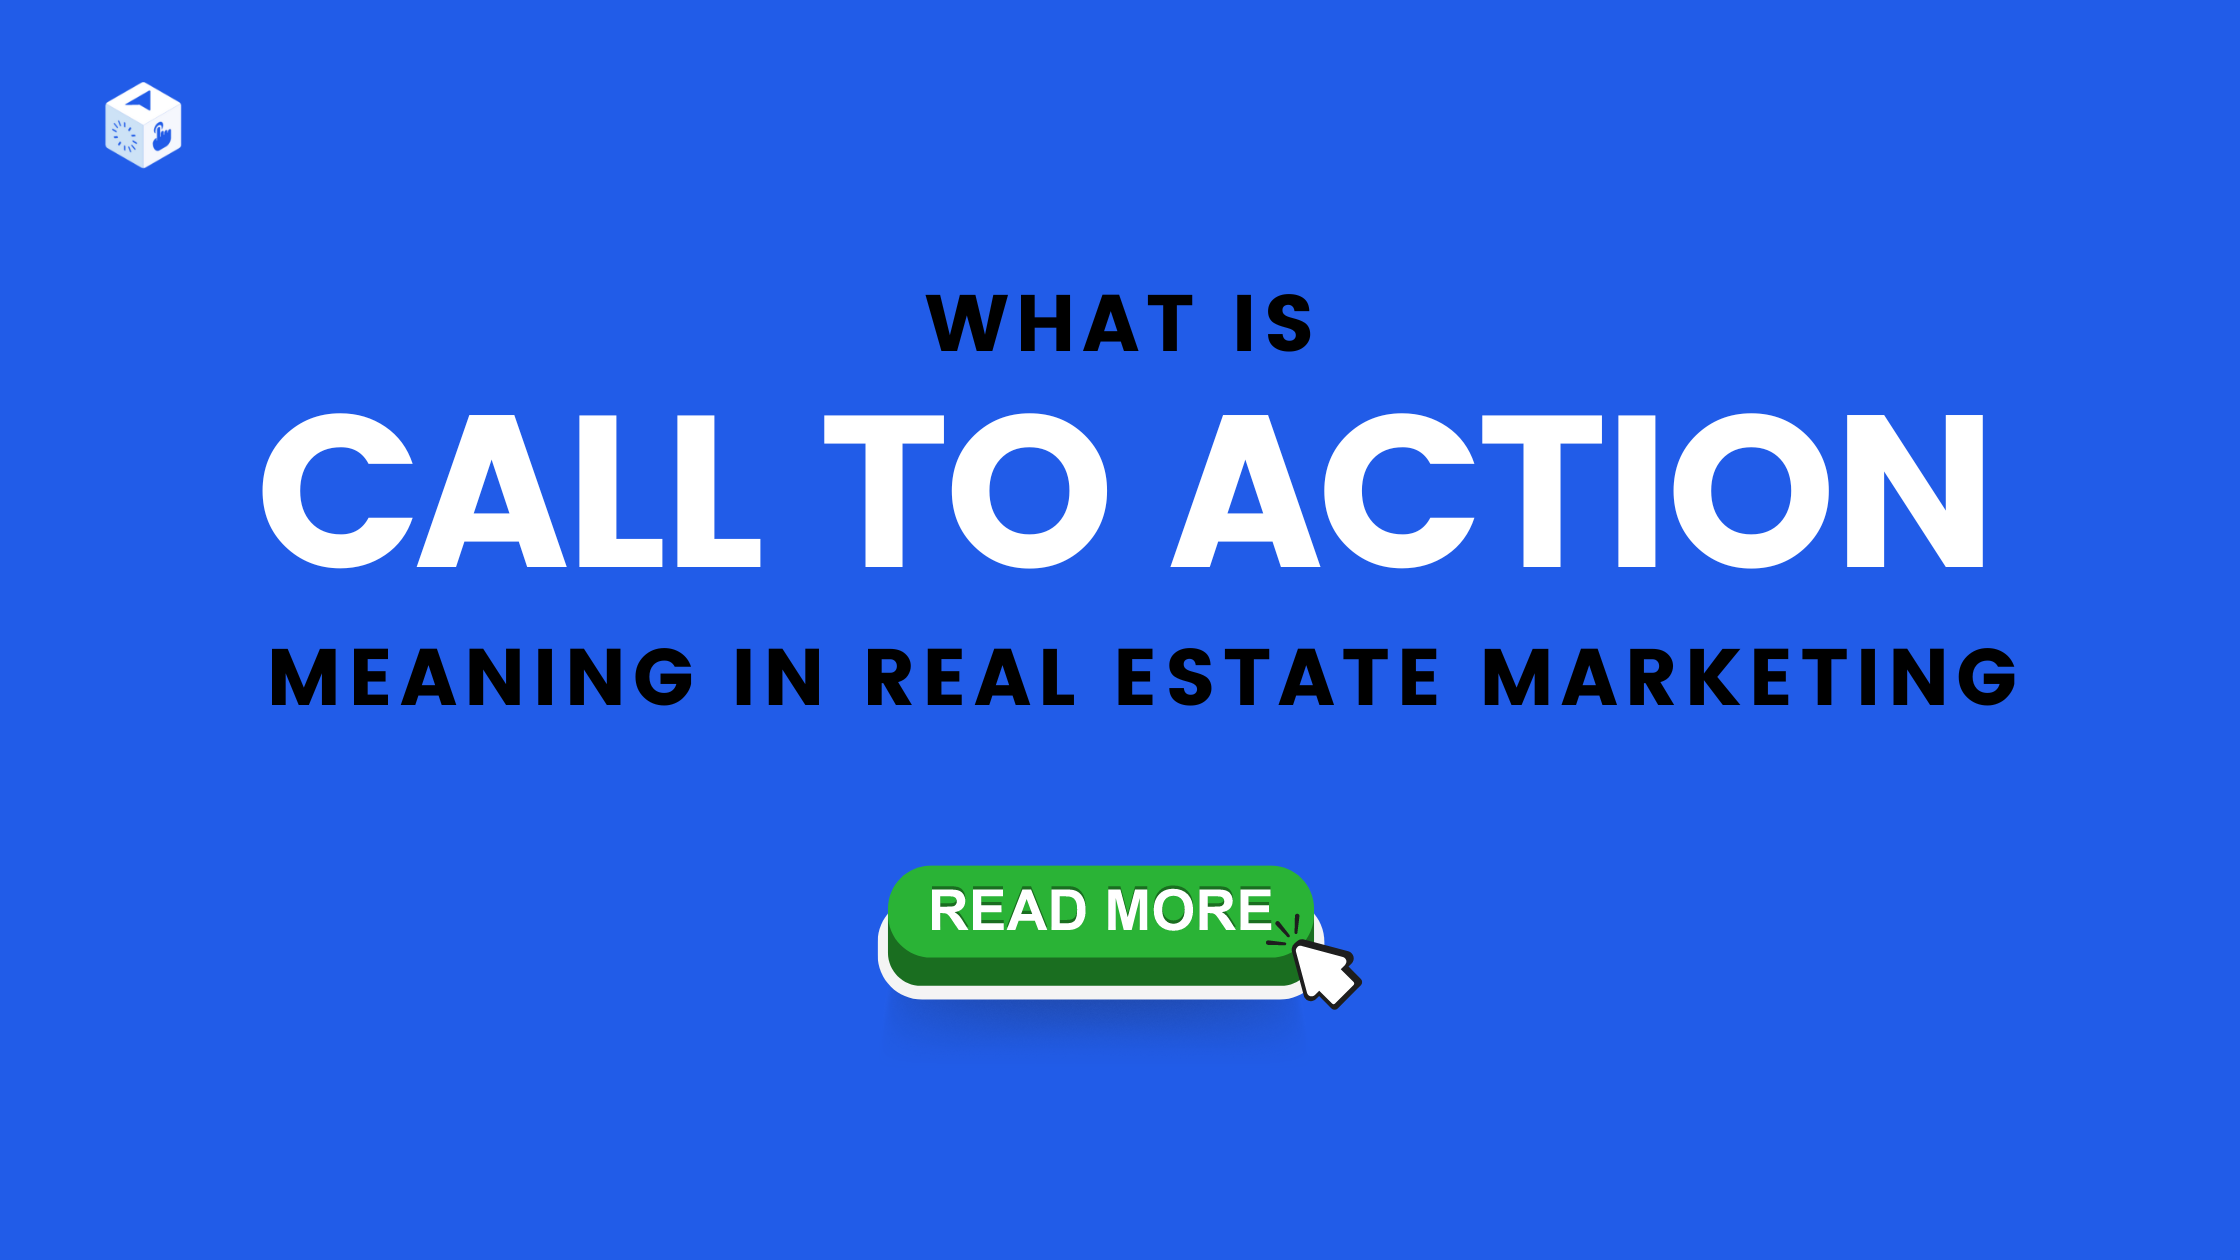 What is the Call to Action Meaning in Real Estate Marketing?